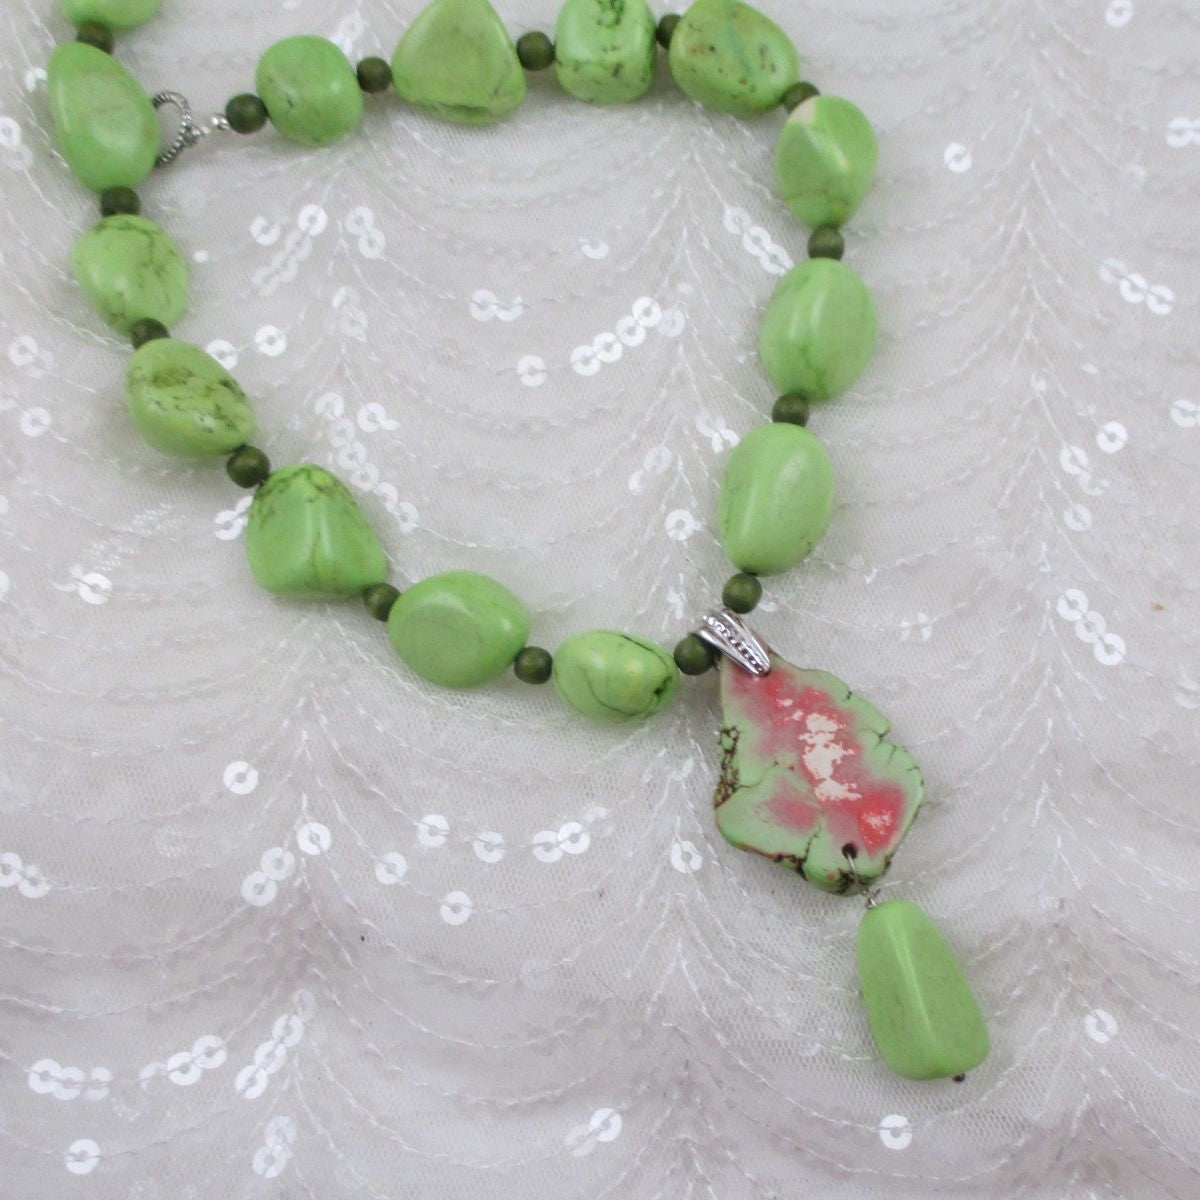 Lime Green Gemstone Nugget Necklace with Pendant - VP's Jewelry